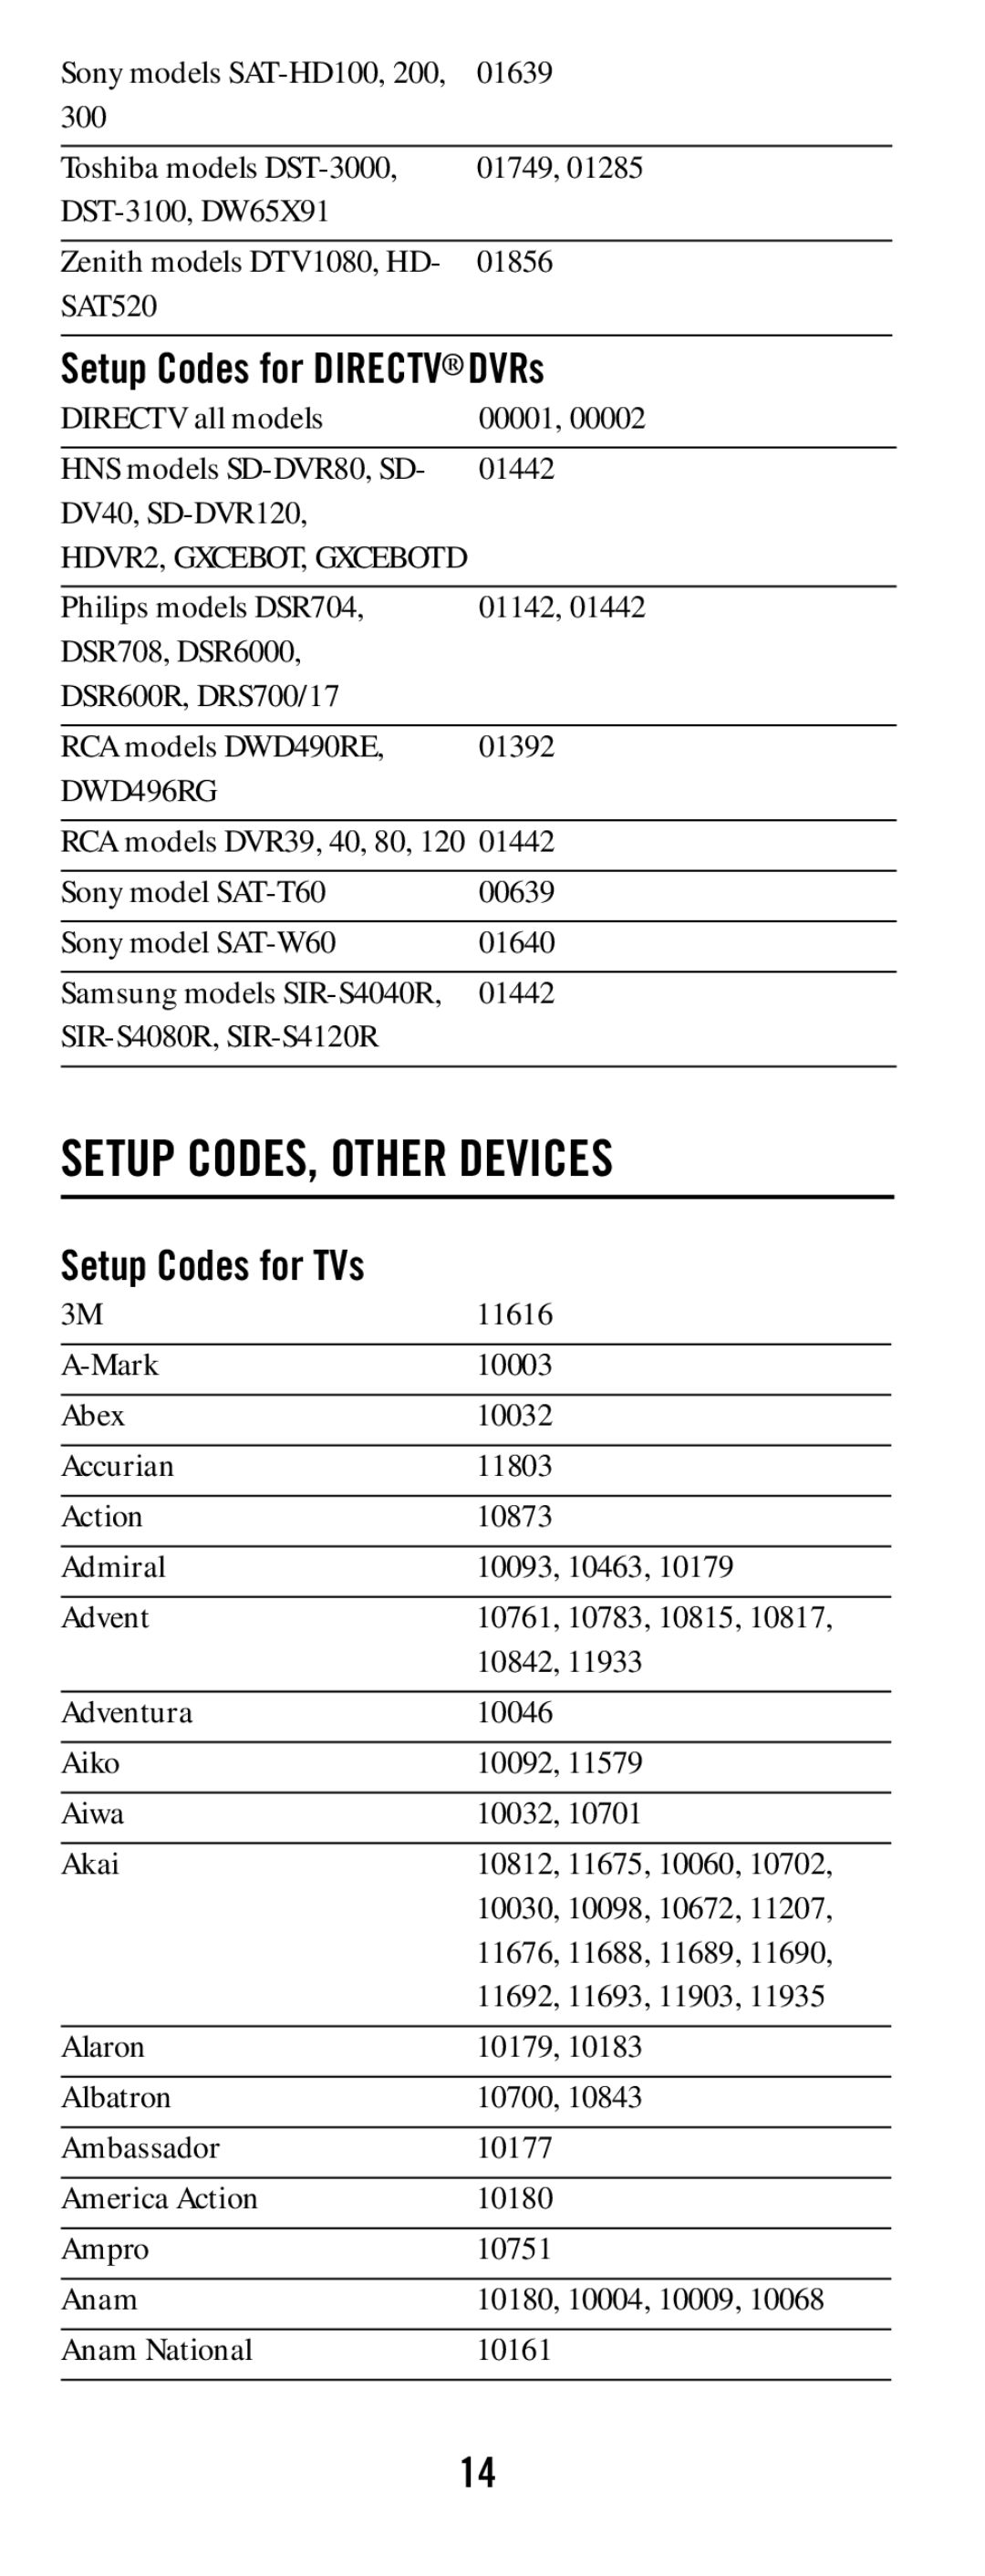 DirecTV RC65 manual Setup CODES, Other Devices, Setup Codes for Directv DVRs, Setup Codes for TVs, DWD496RG 